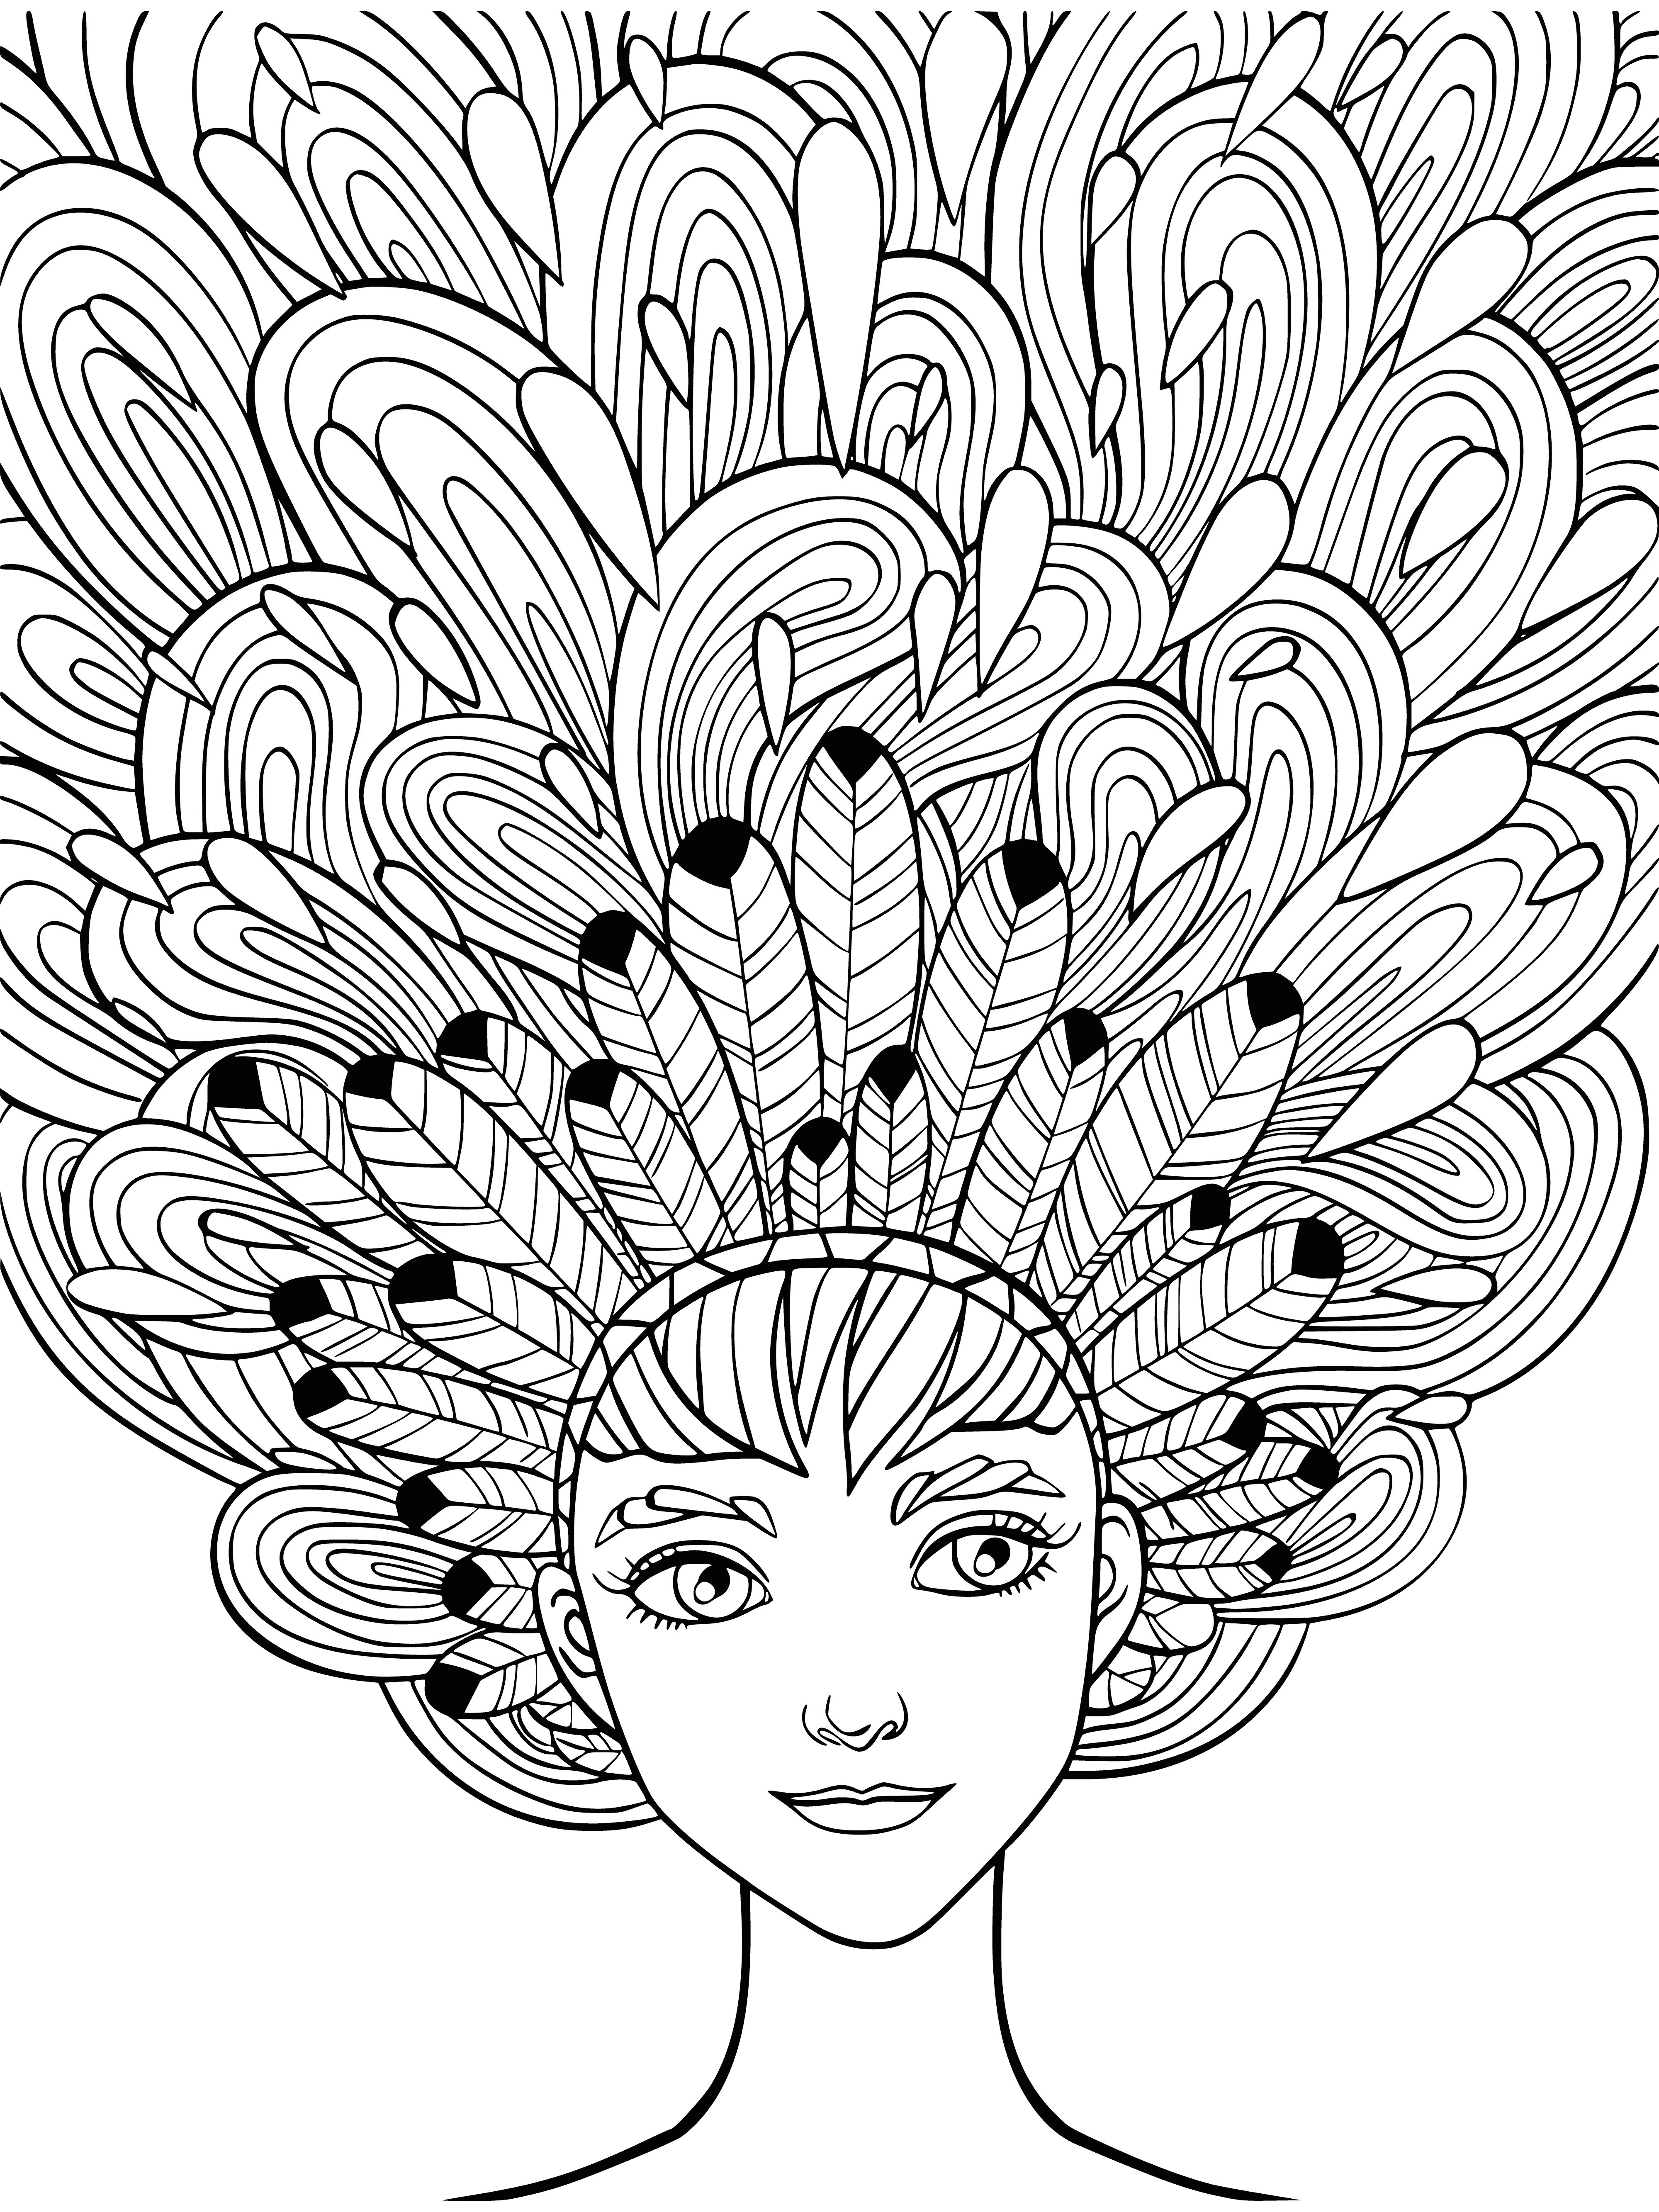 Firebird coloring page